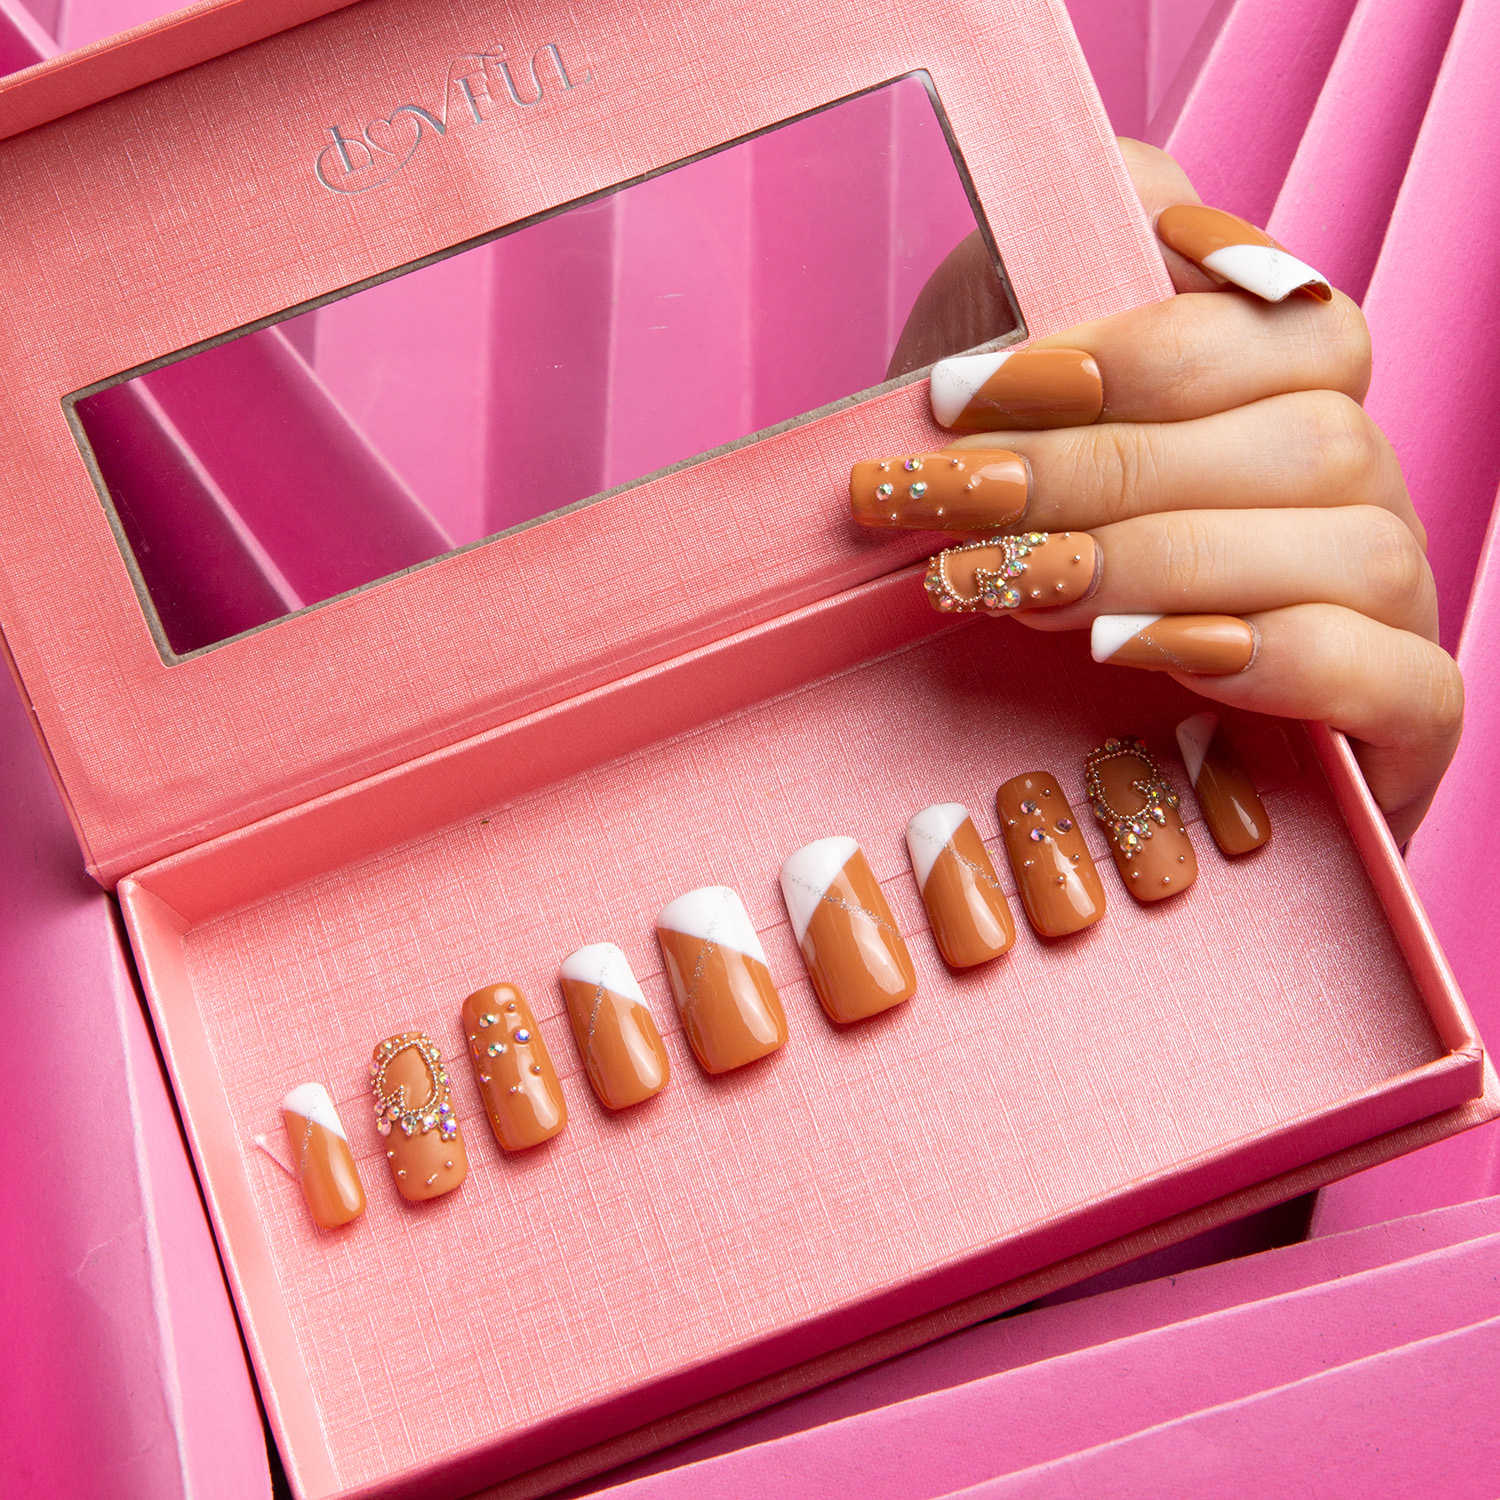 Press-on acrylic nails in a pink box, featuring white French tips with glitter on a nude base. One hand shows the nails applied, highlighting the 'Lovely Kitten Heels' design by Lovful.